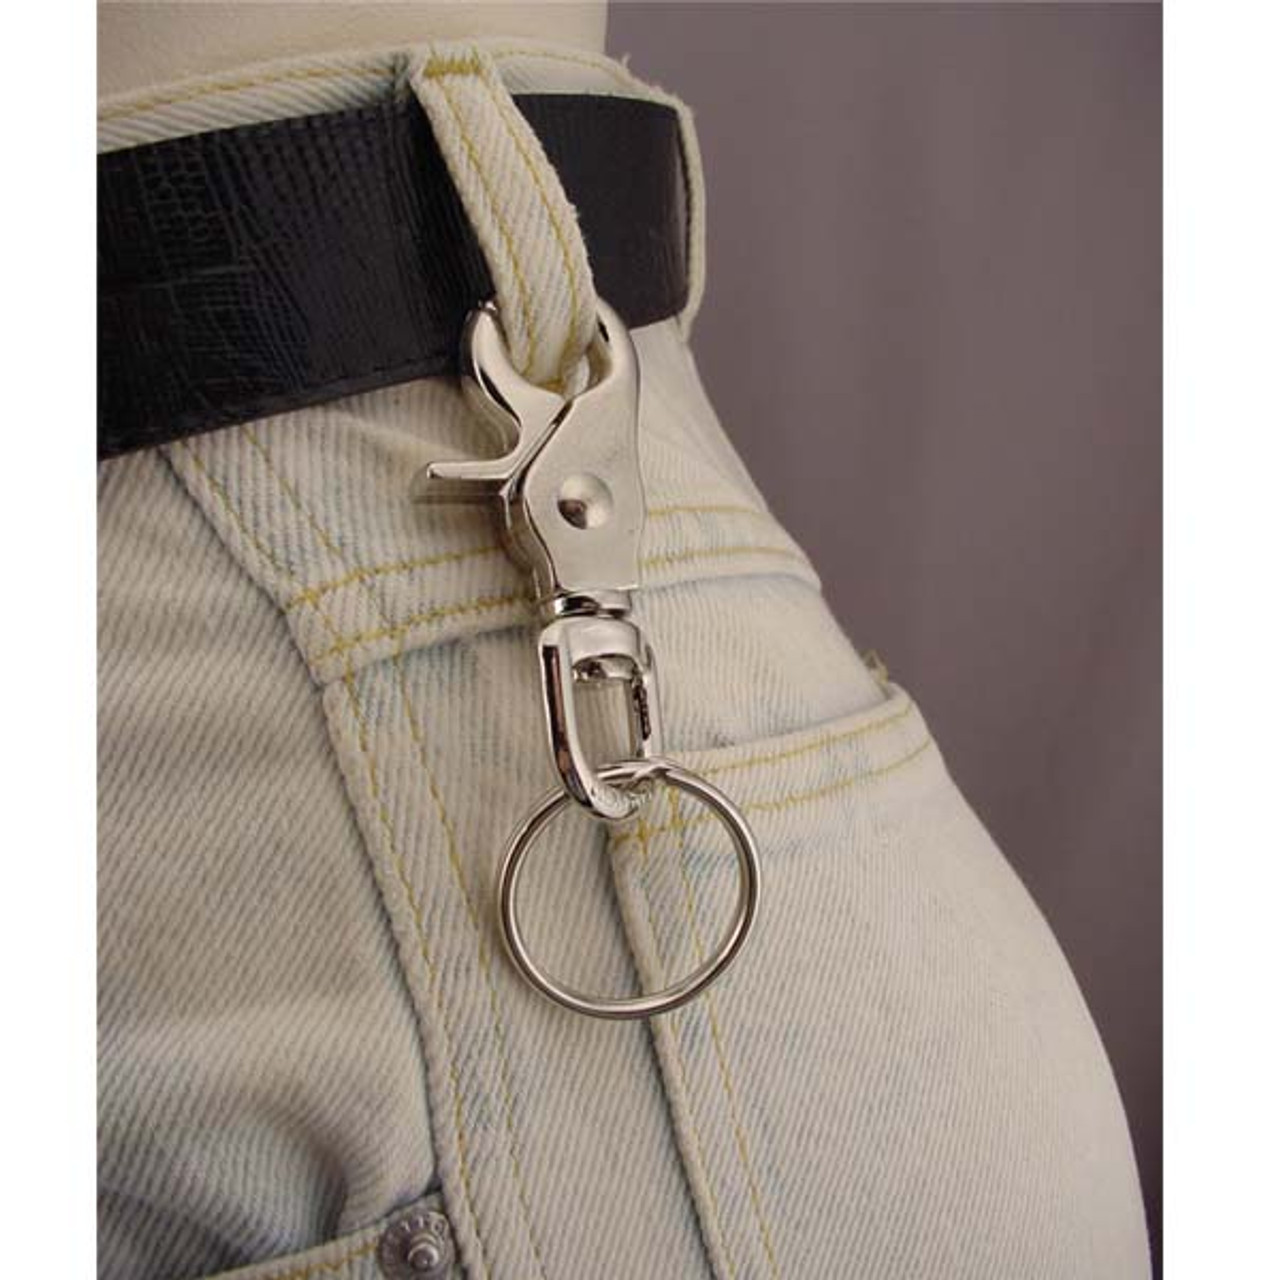 KEY-BAK Large Trigger Snap Key Chain Accessory with 1.125 inch Split Ring